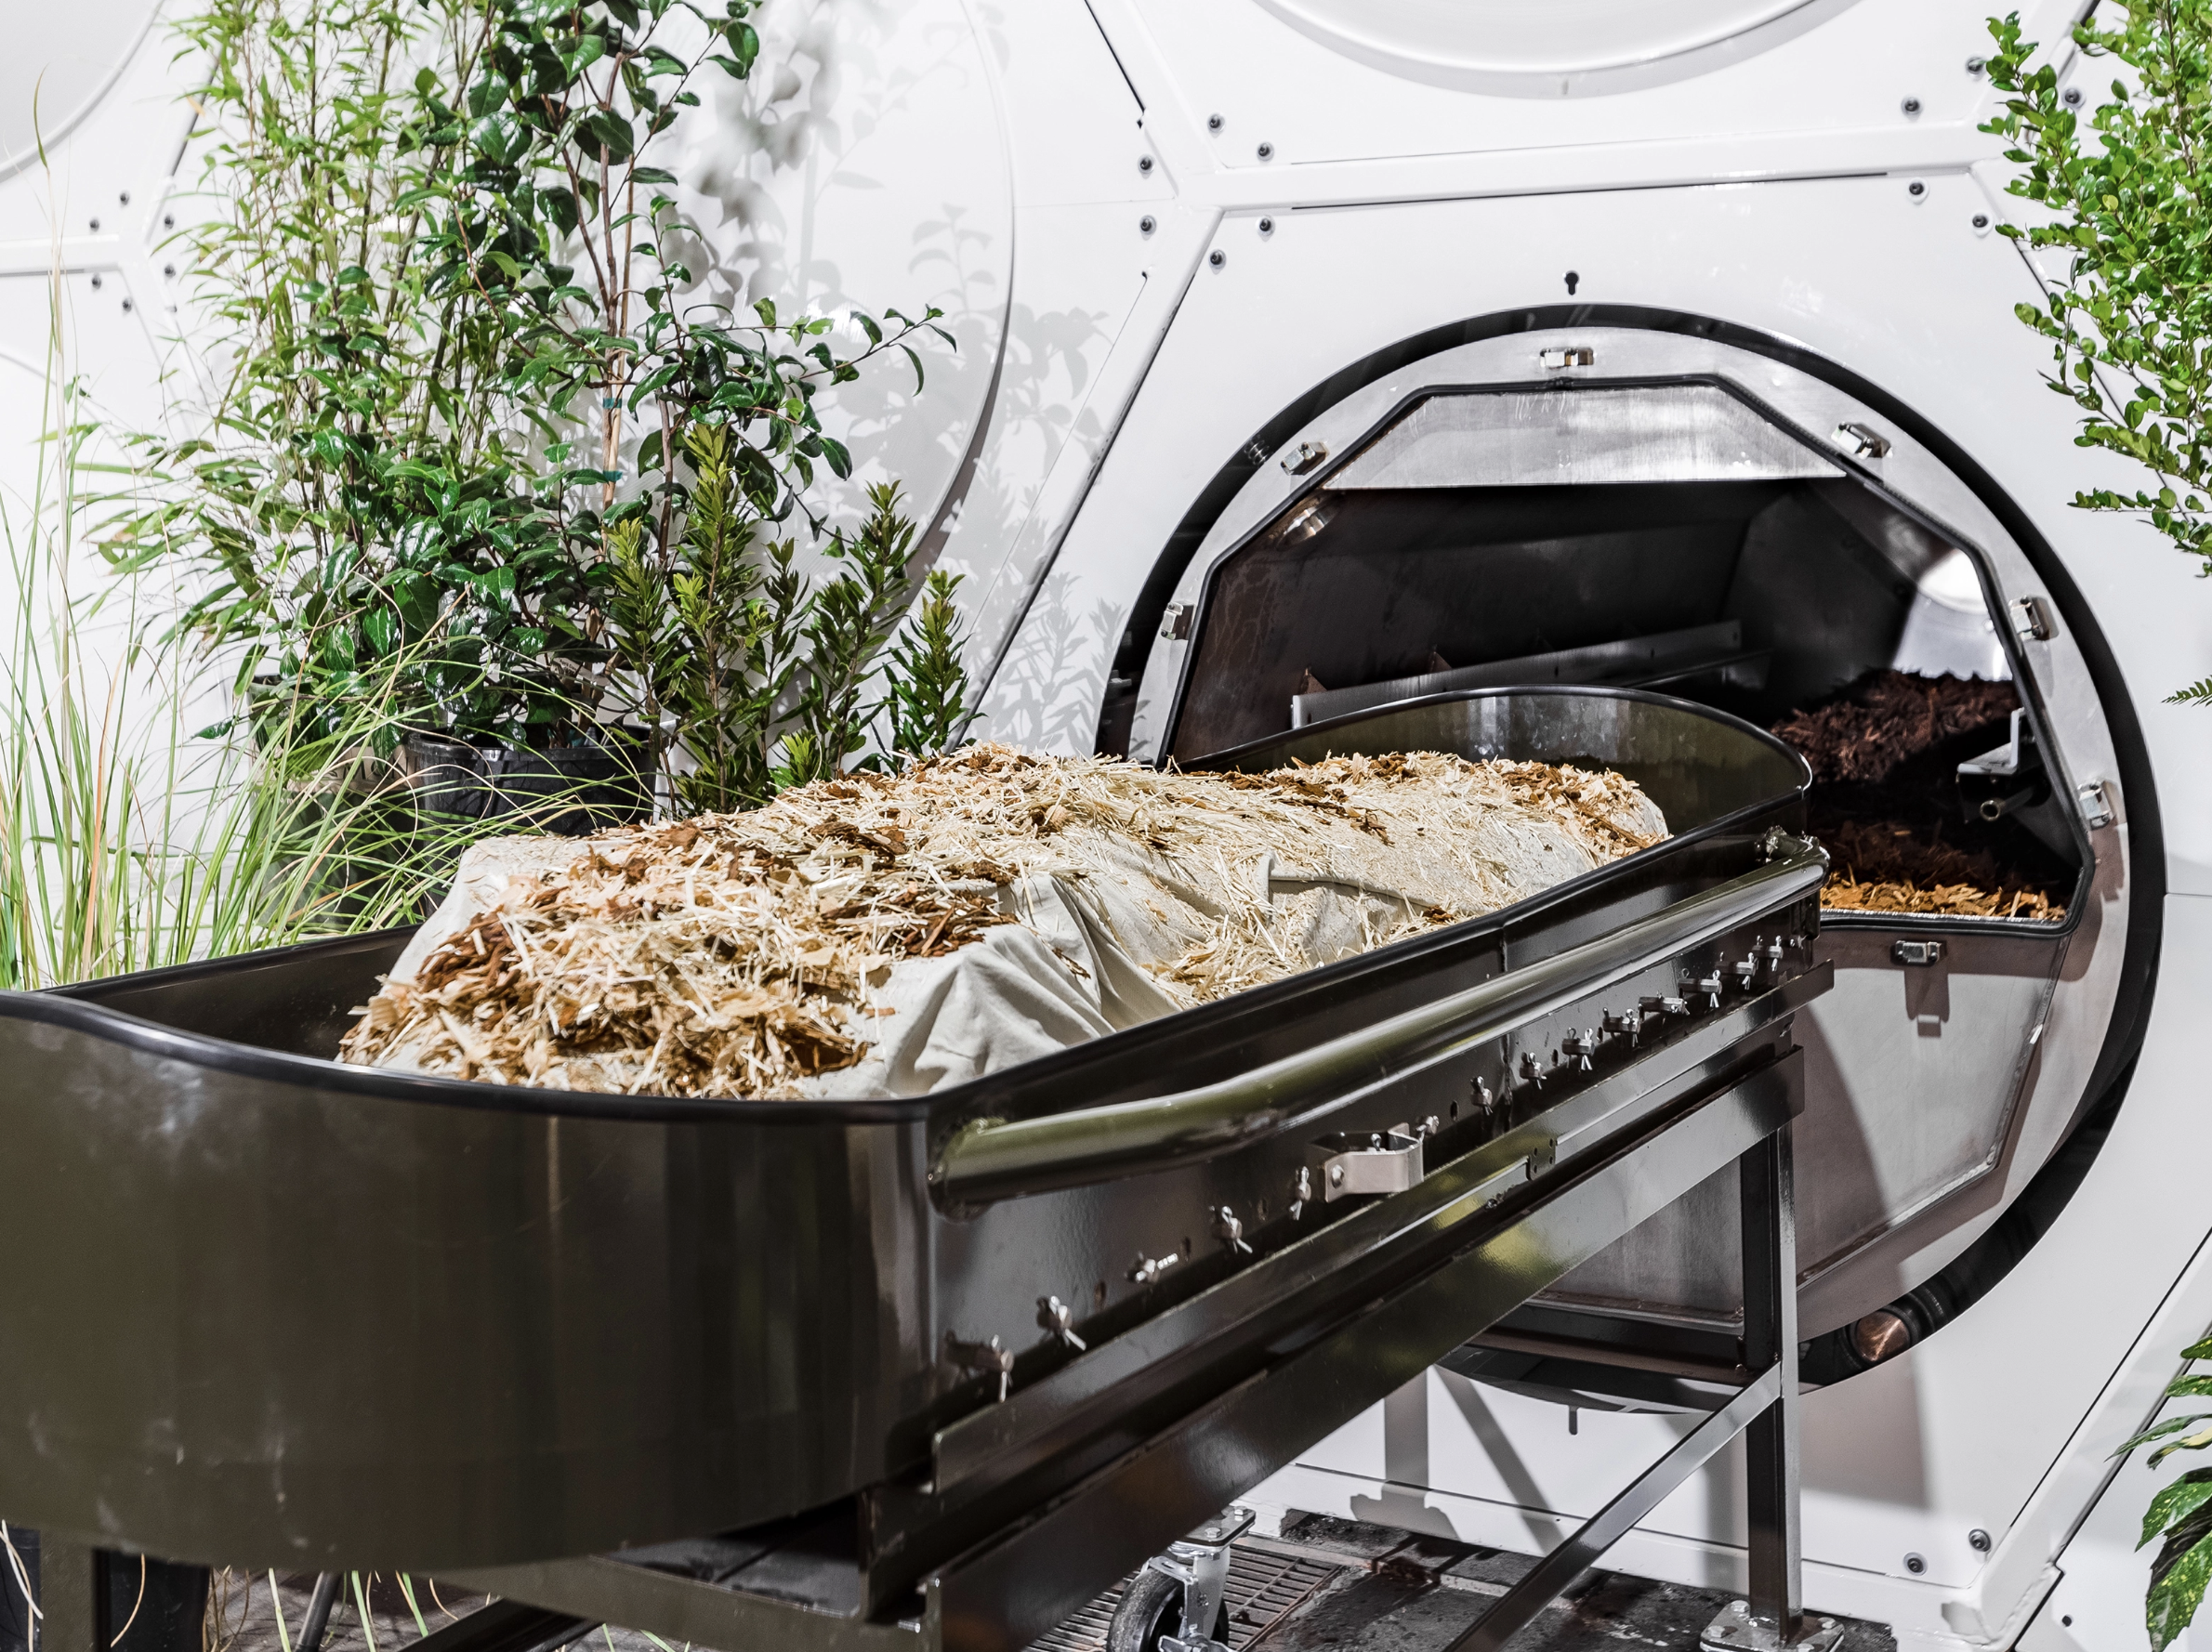 Seattle-based funeral home Recompose offers to compost bodies, turning them into soil — a recently emerging alternative to cremation and burials.